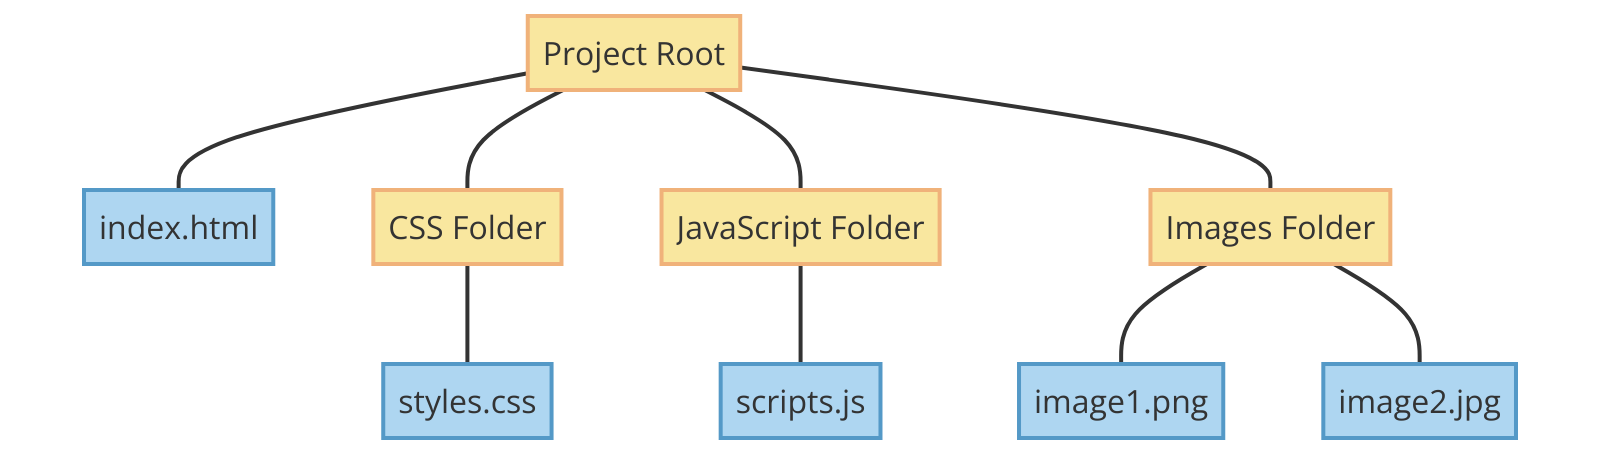 Web Project File Structure Diagram: A flowchart or tree diagram showing a typical web project's file structure, including HTML, CSS, JavaScript files, and a folder for images.